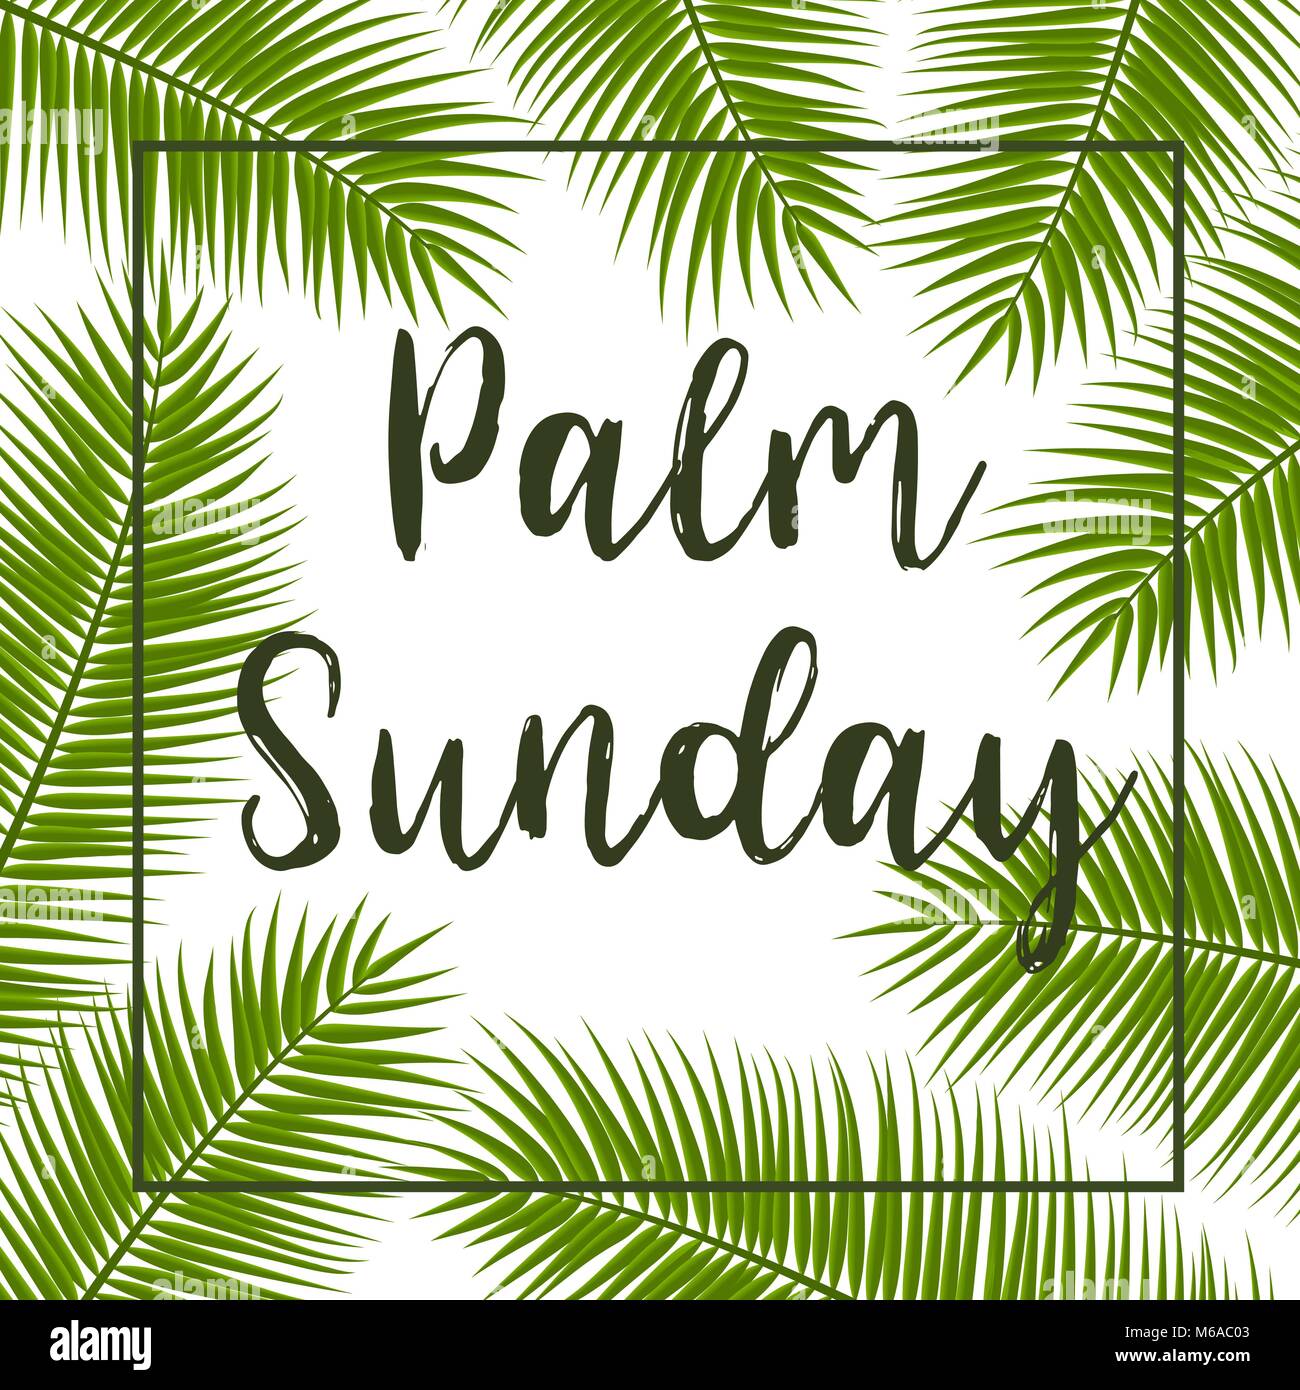 Green Palm leafs vector square frame. Vector illustration for the Christian holiday. Palm Sunday text handwritten font. Stock Vector